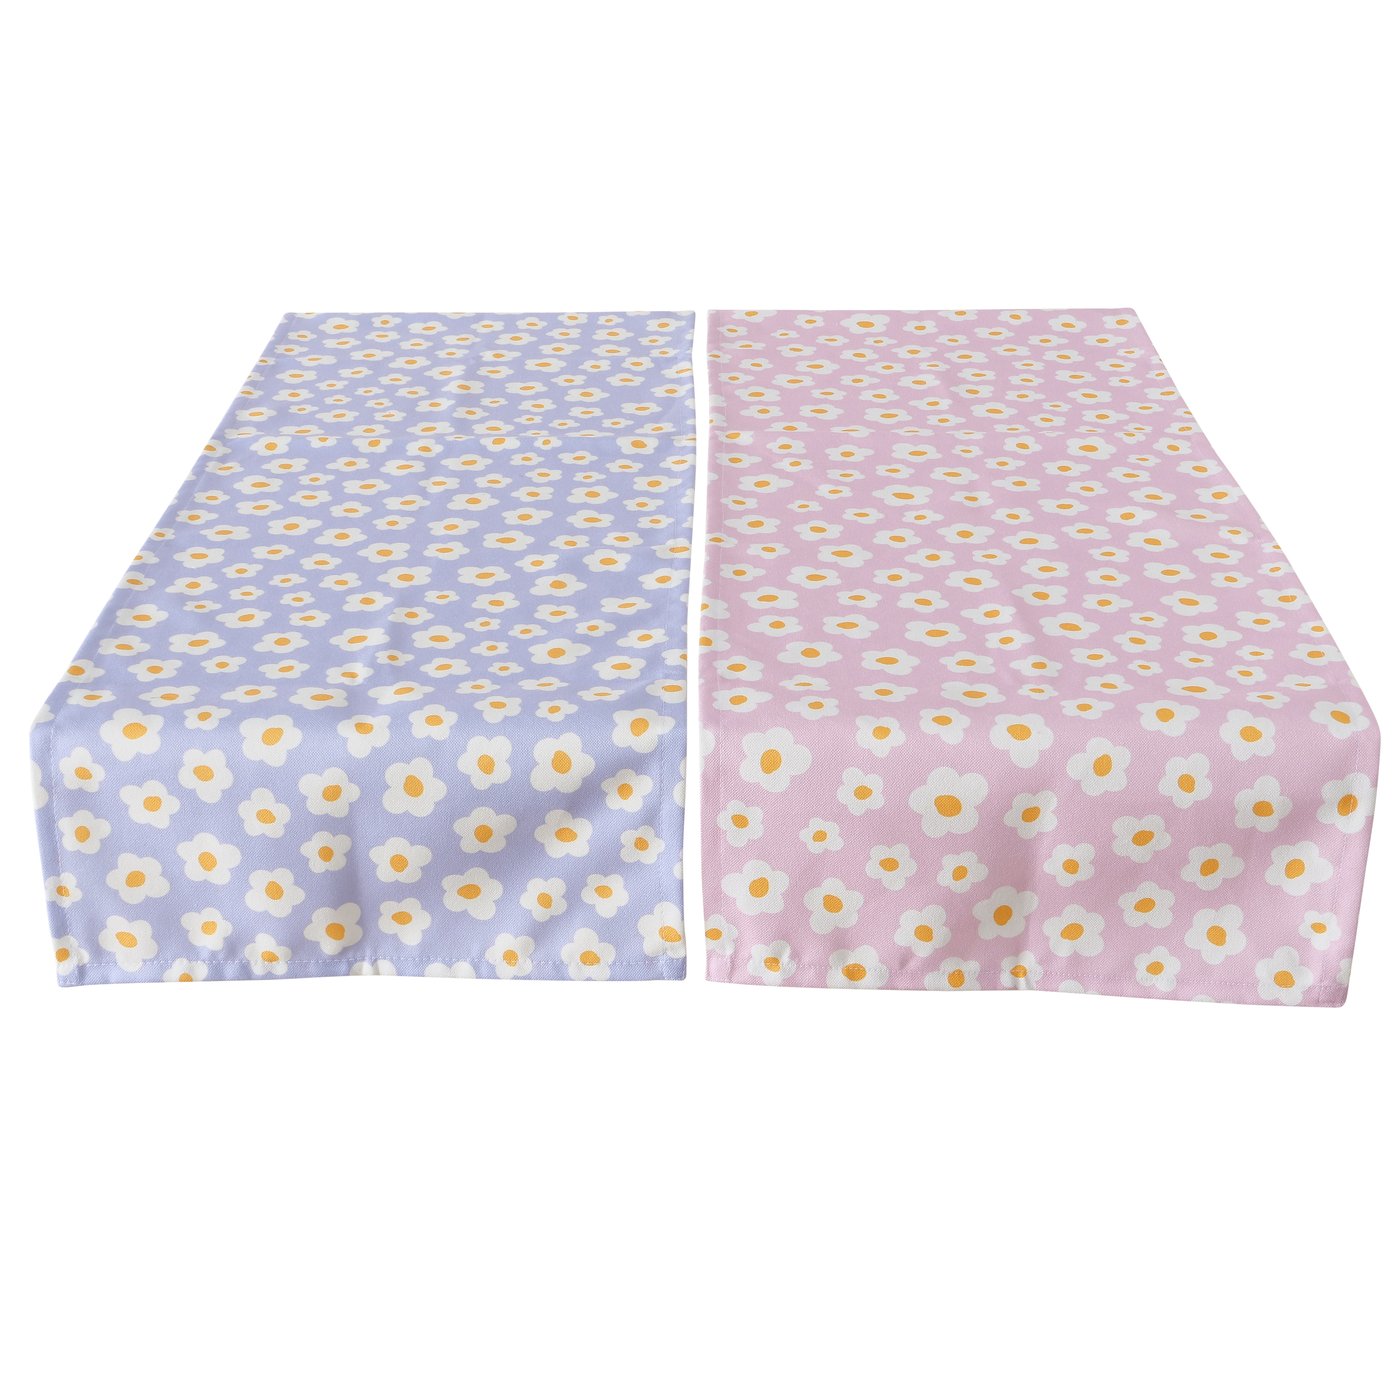 &Quirky Springtime Daisy Table Runner : Pink or Lilac